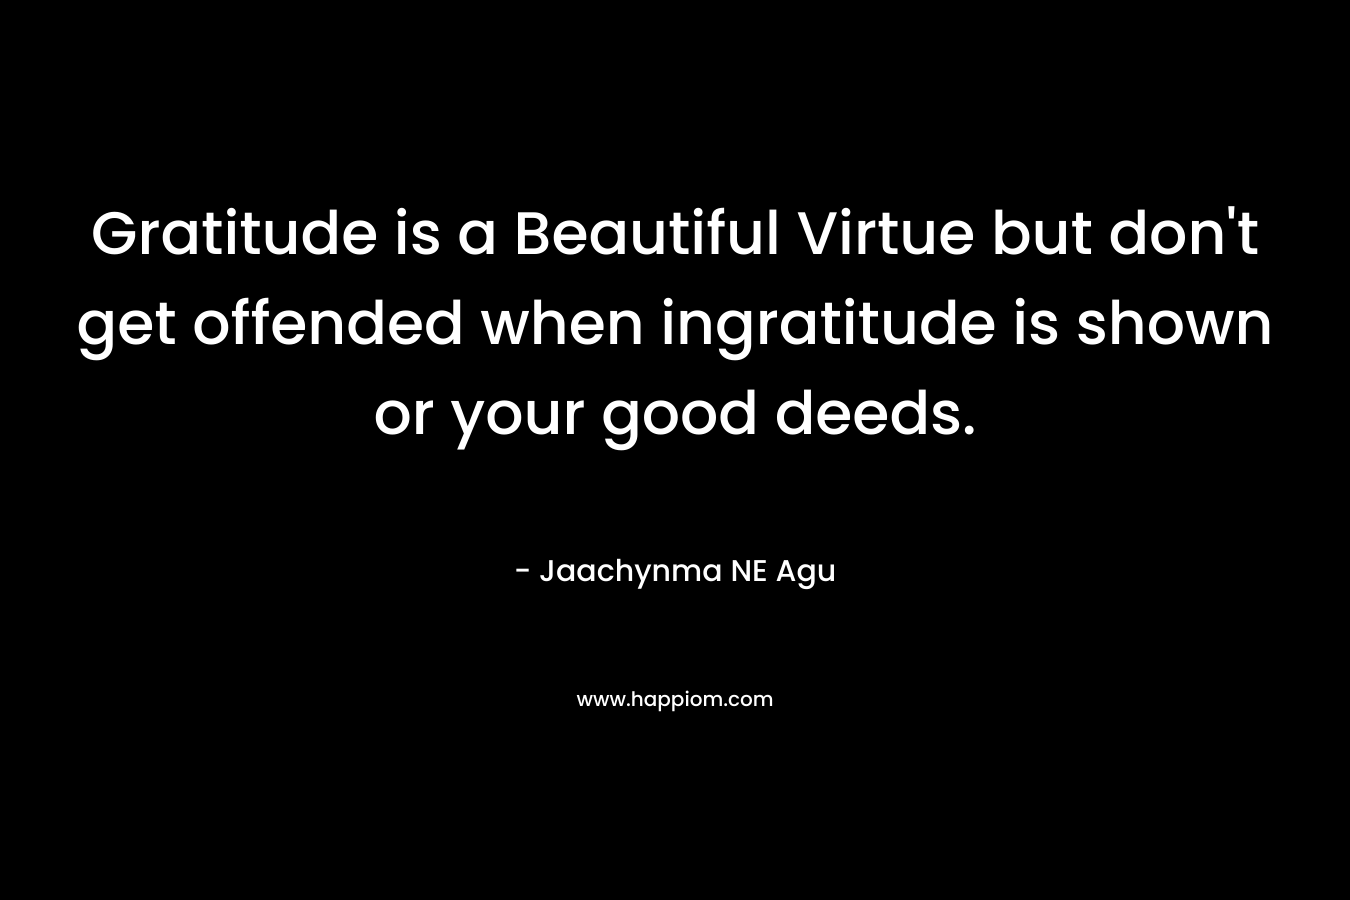 Gratitude is a Beautiful Virtue but don’t get offended when ingratitude is shown or your good deeds. – Jaachynma NE Agu